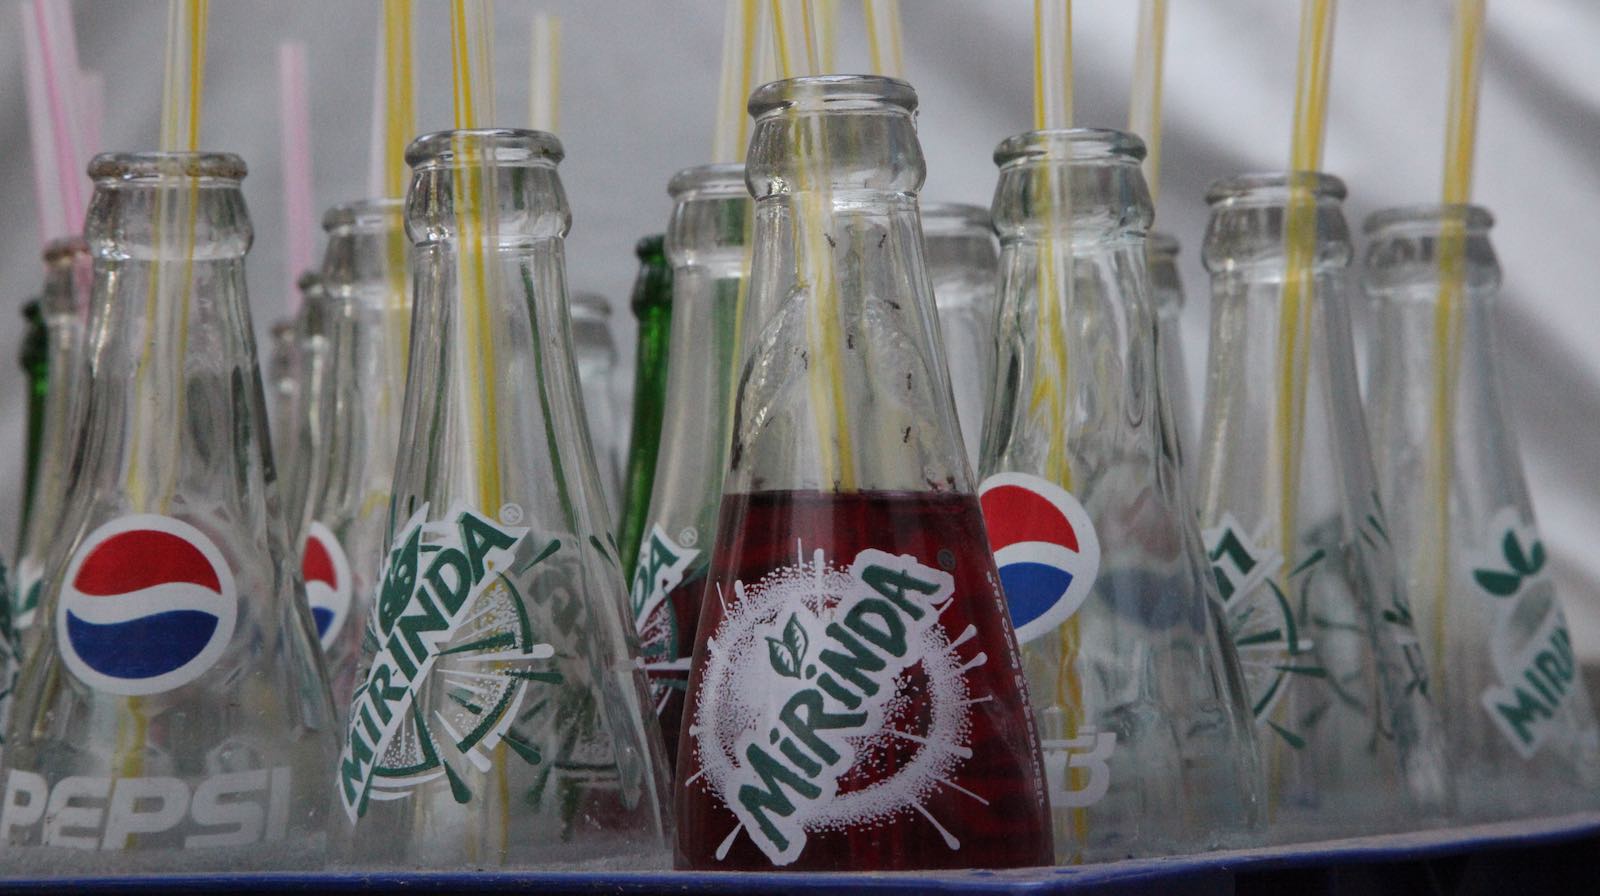 Sweet drinks and the sour cost (Photo: Peter/Flickr)